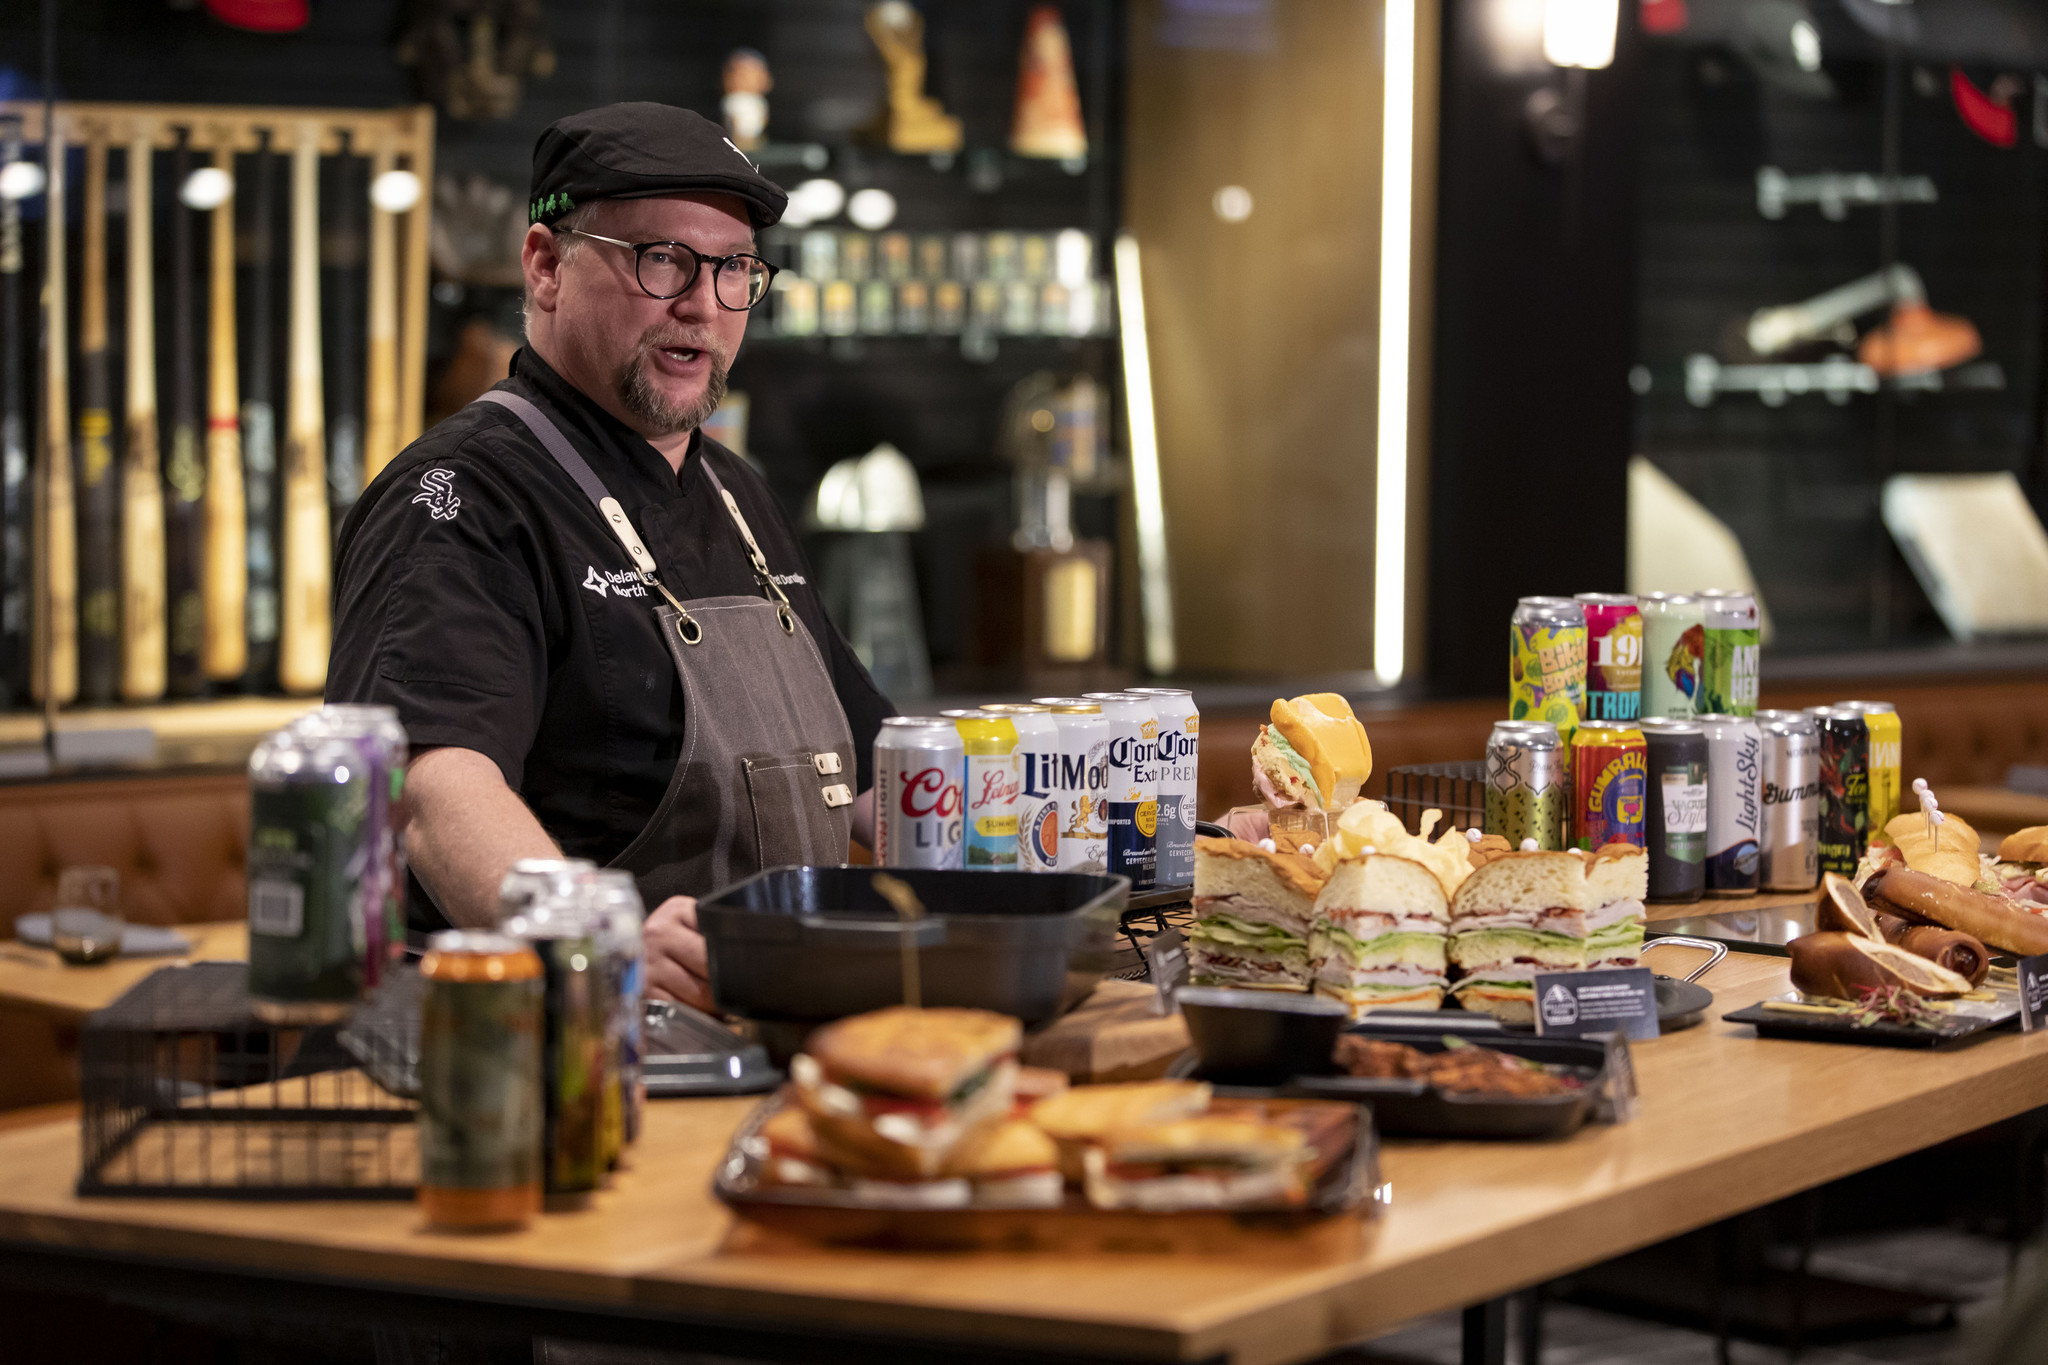 Chicago White Sox: New food at Guaranteed Rate Field